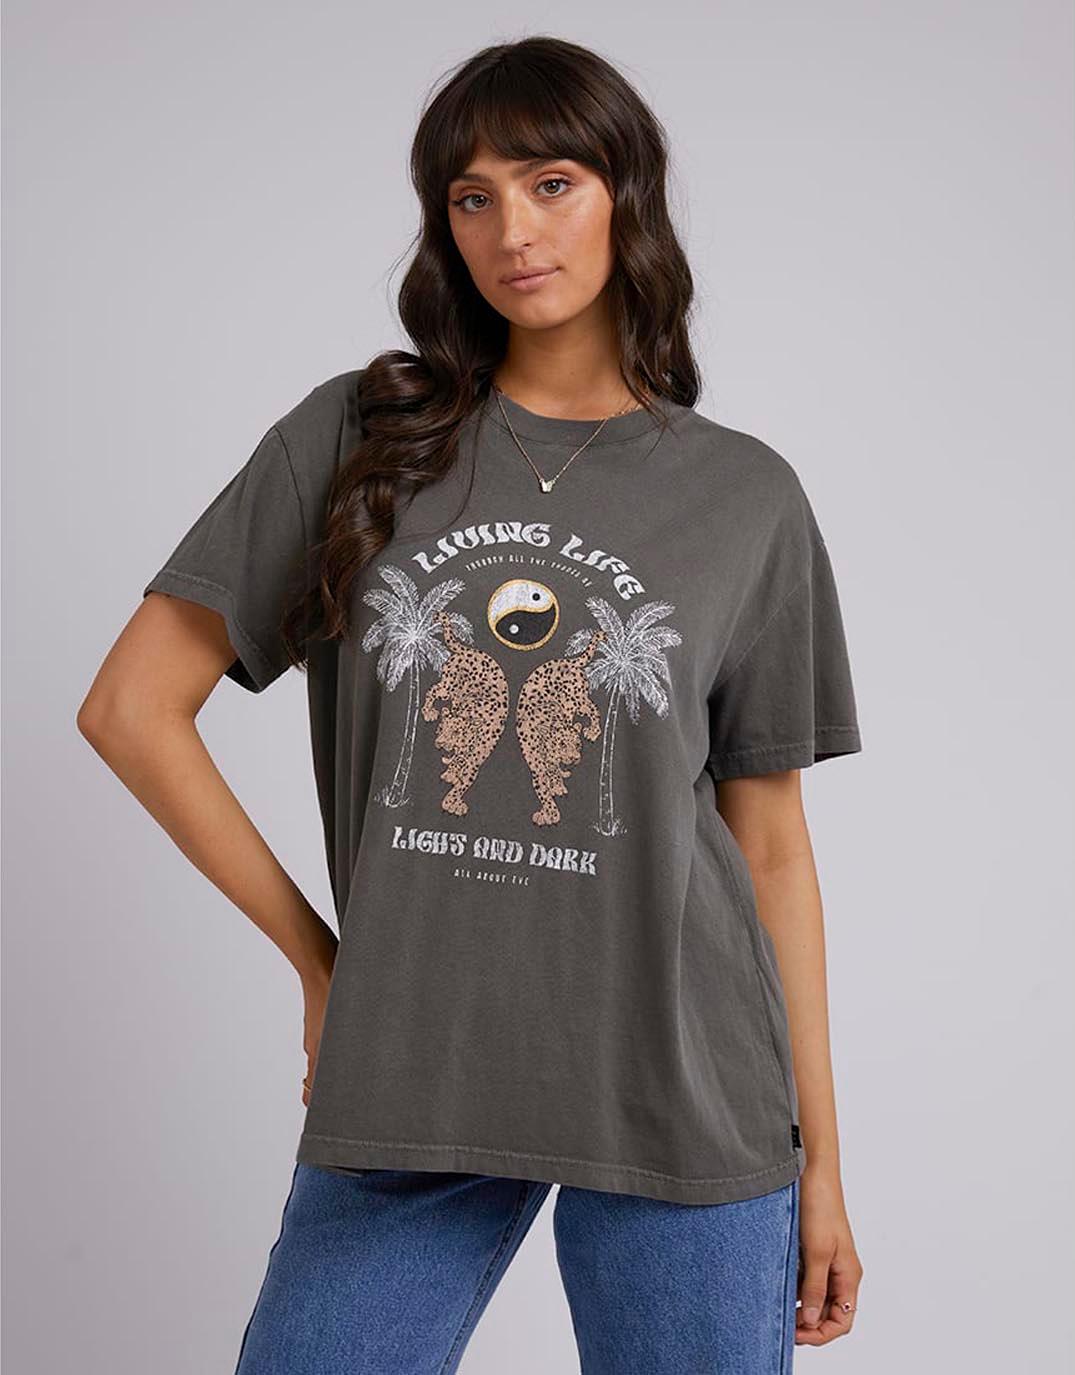 All About Eve - Living Life Standard Tee - Charcoal - paulaglazebrook Tops